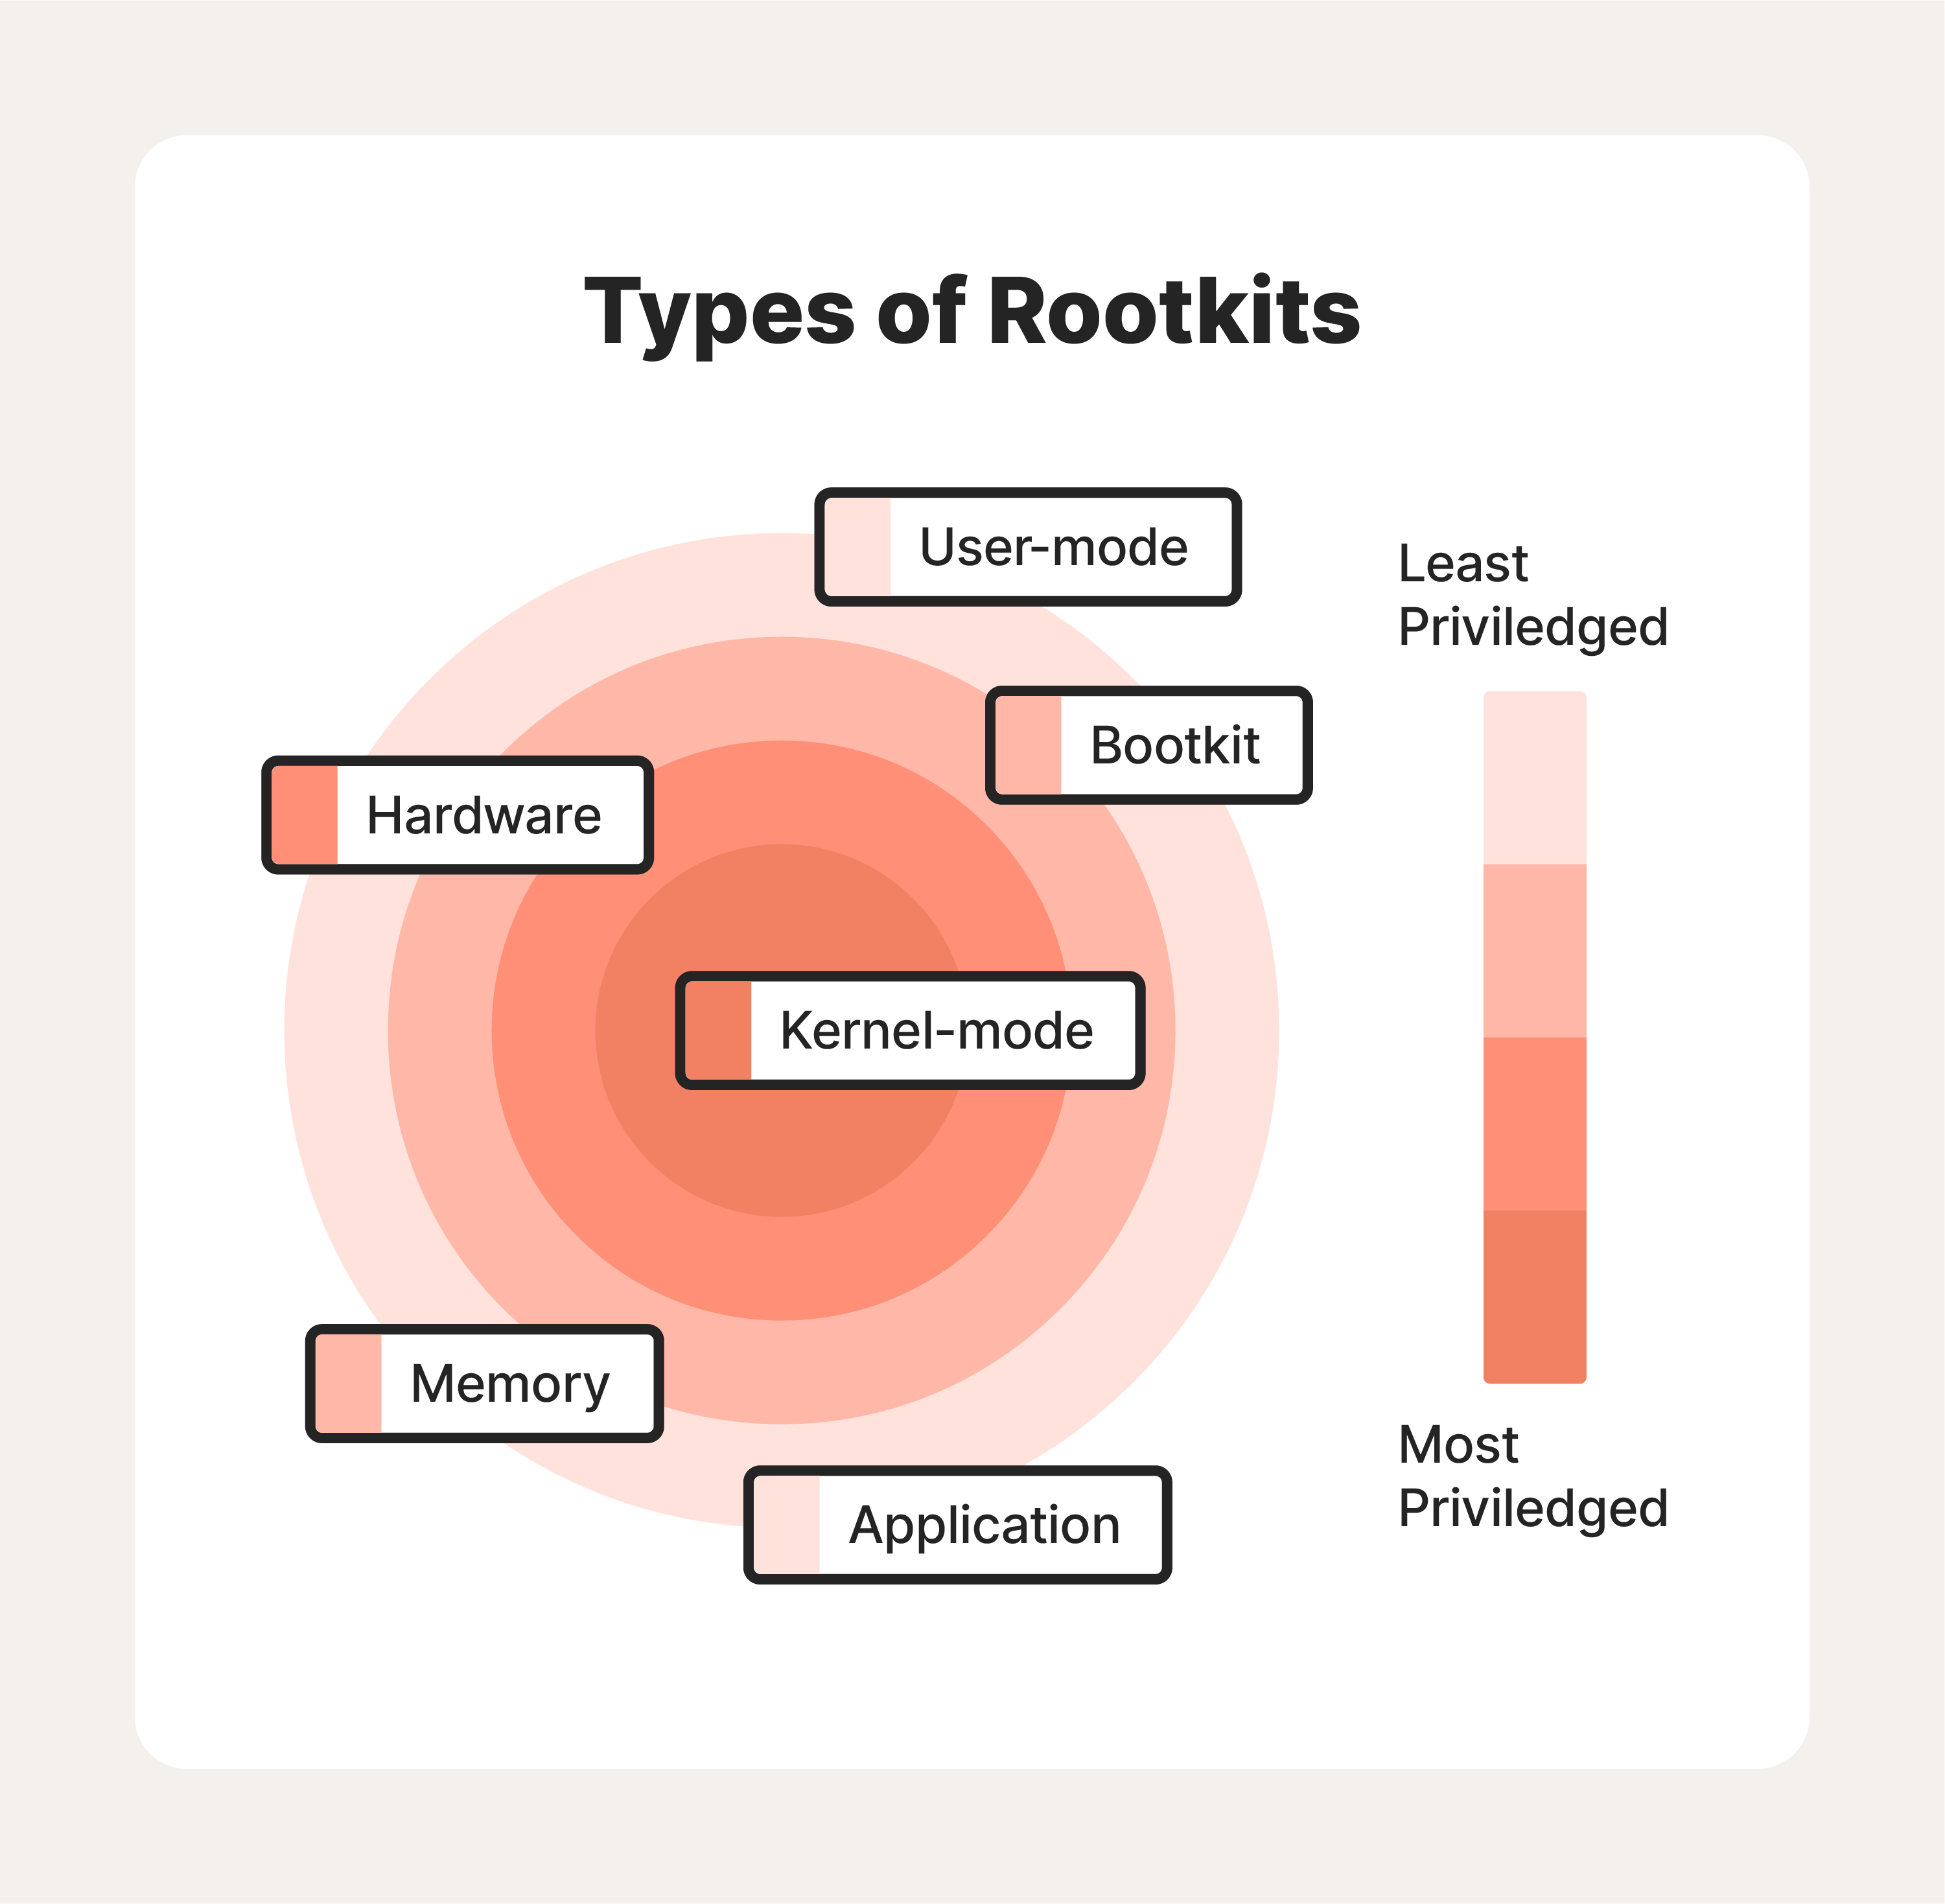 A bullseye plots out different types of rootkits and how privileged they are.  